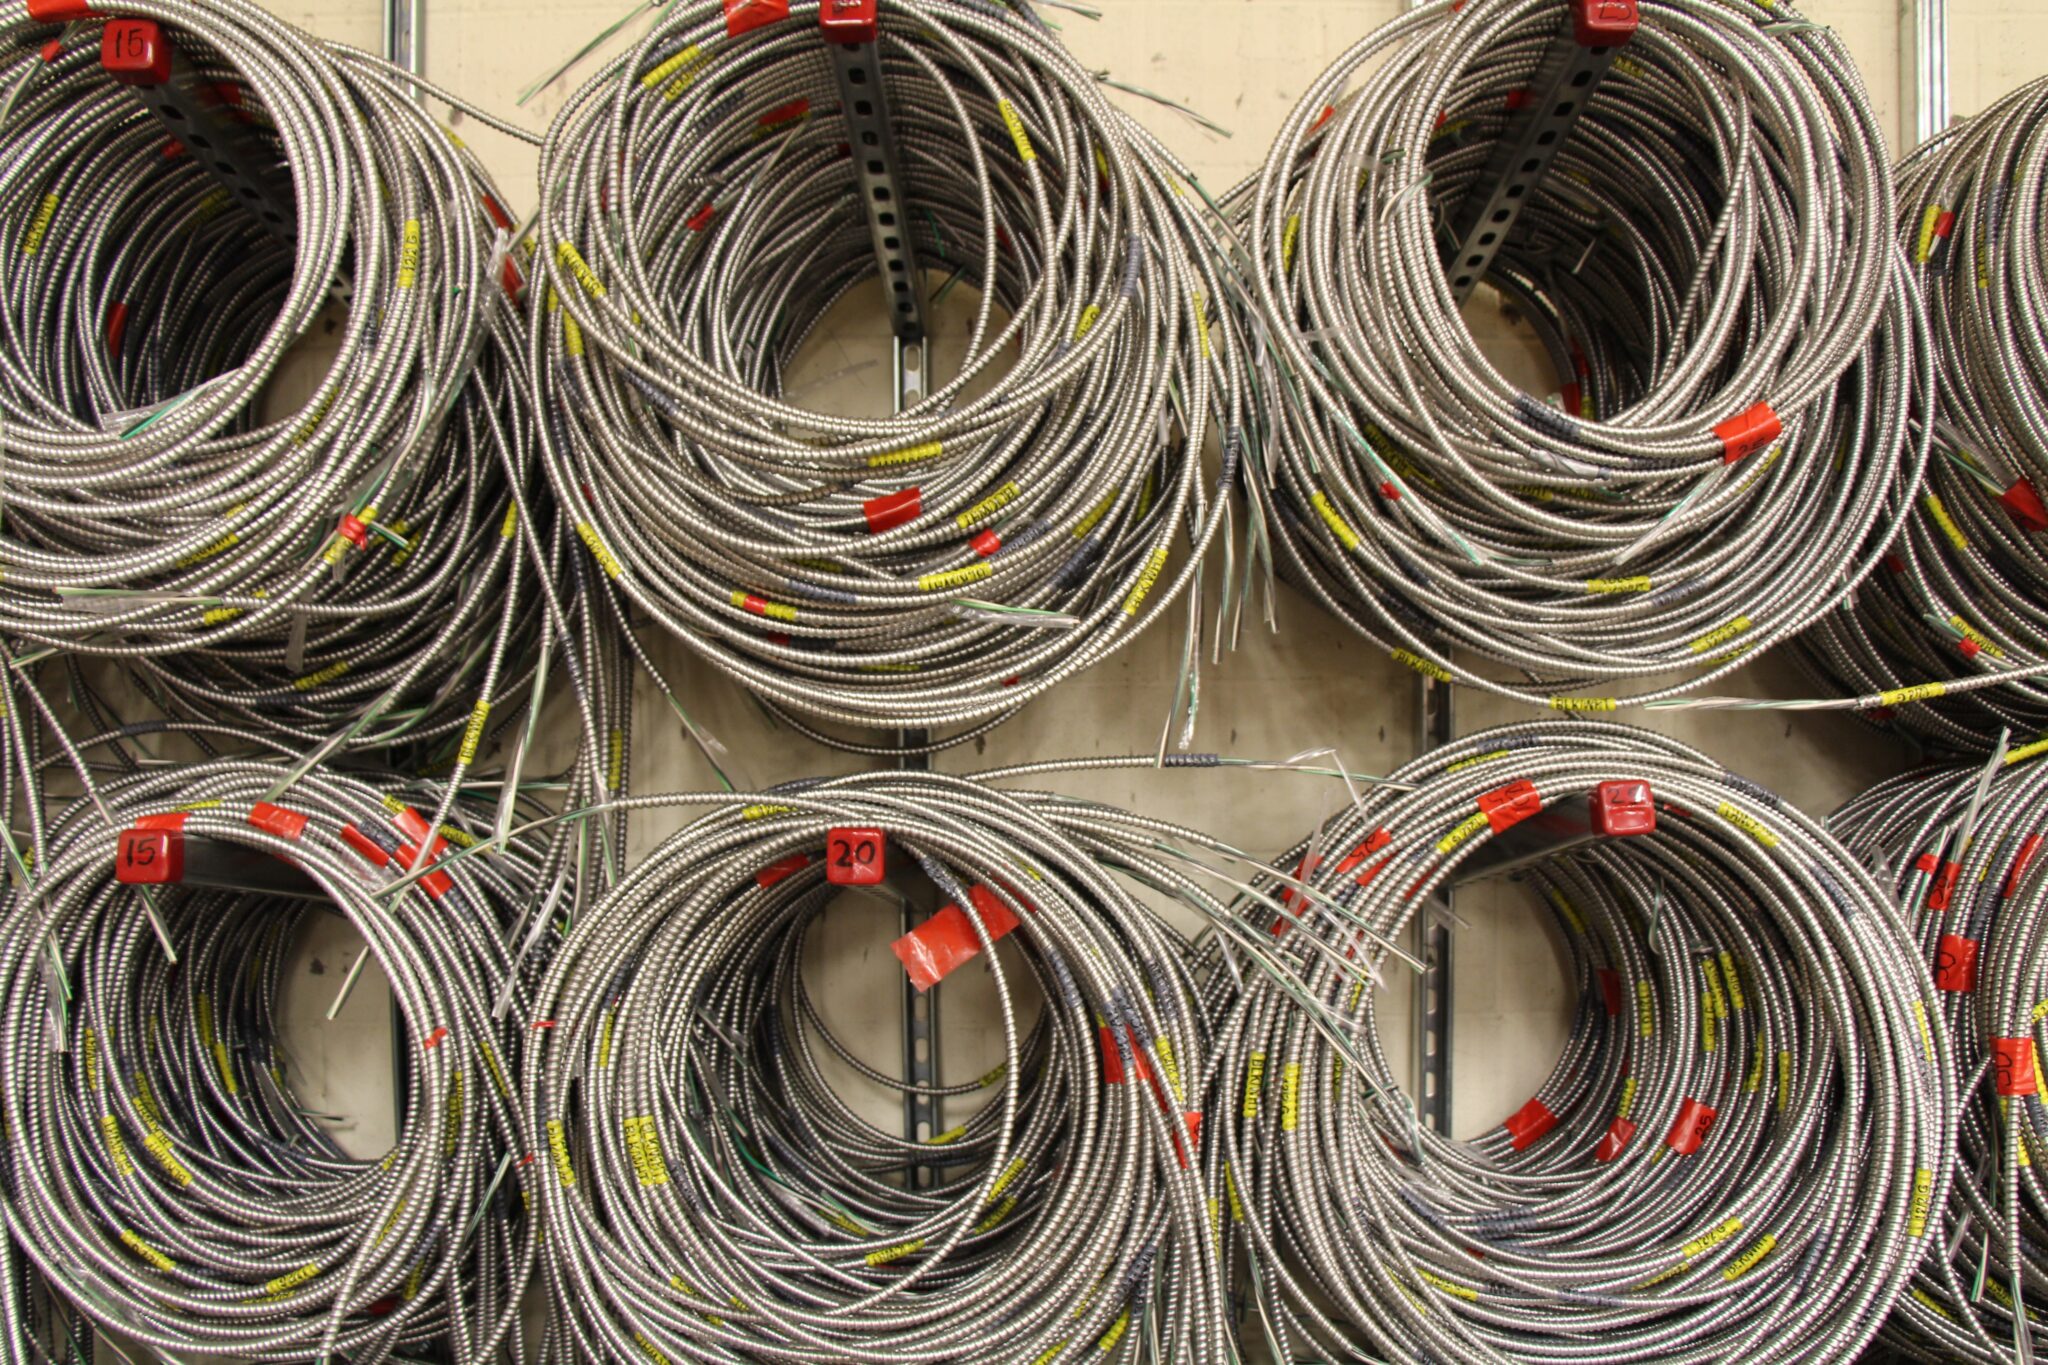 power cable racks with many silver cables